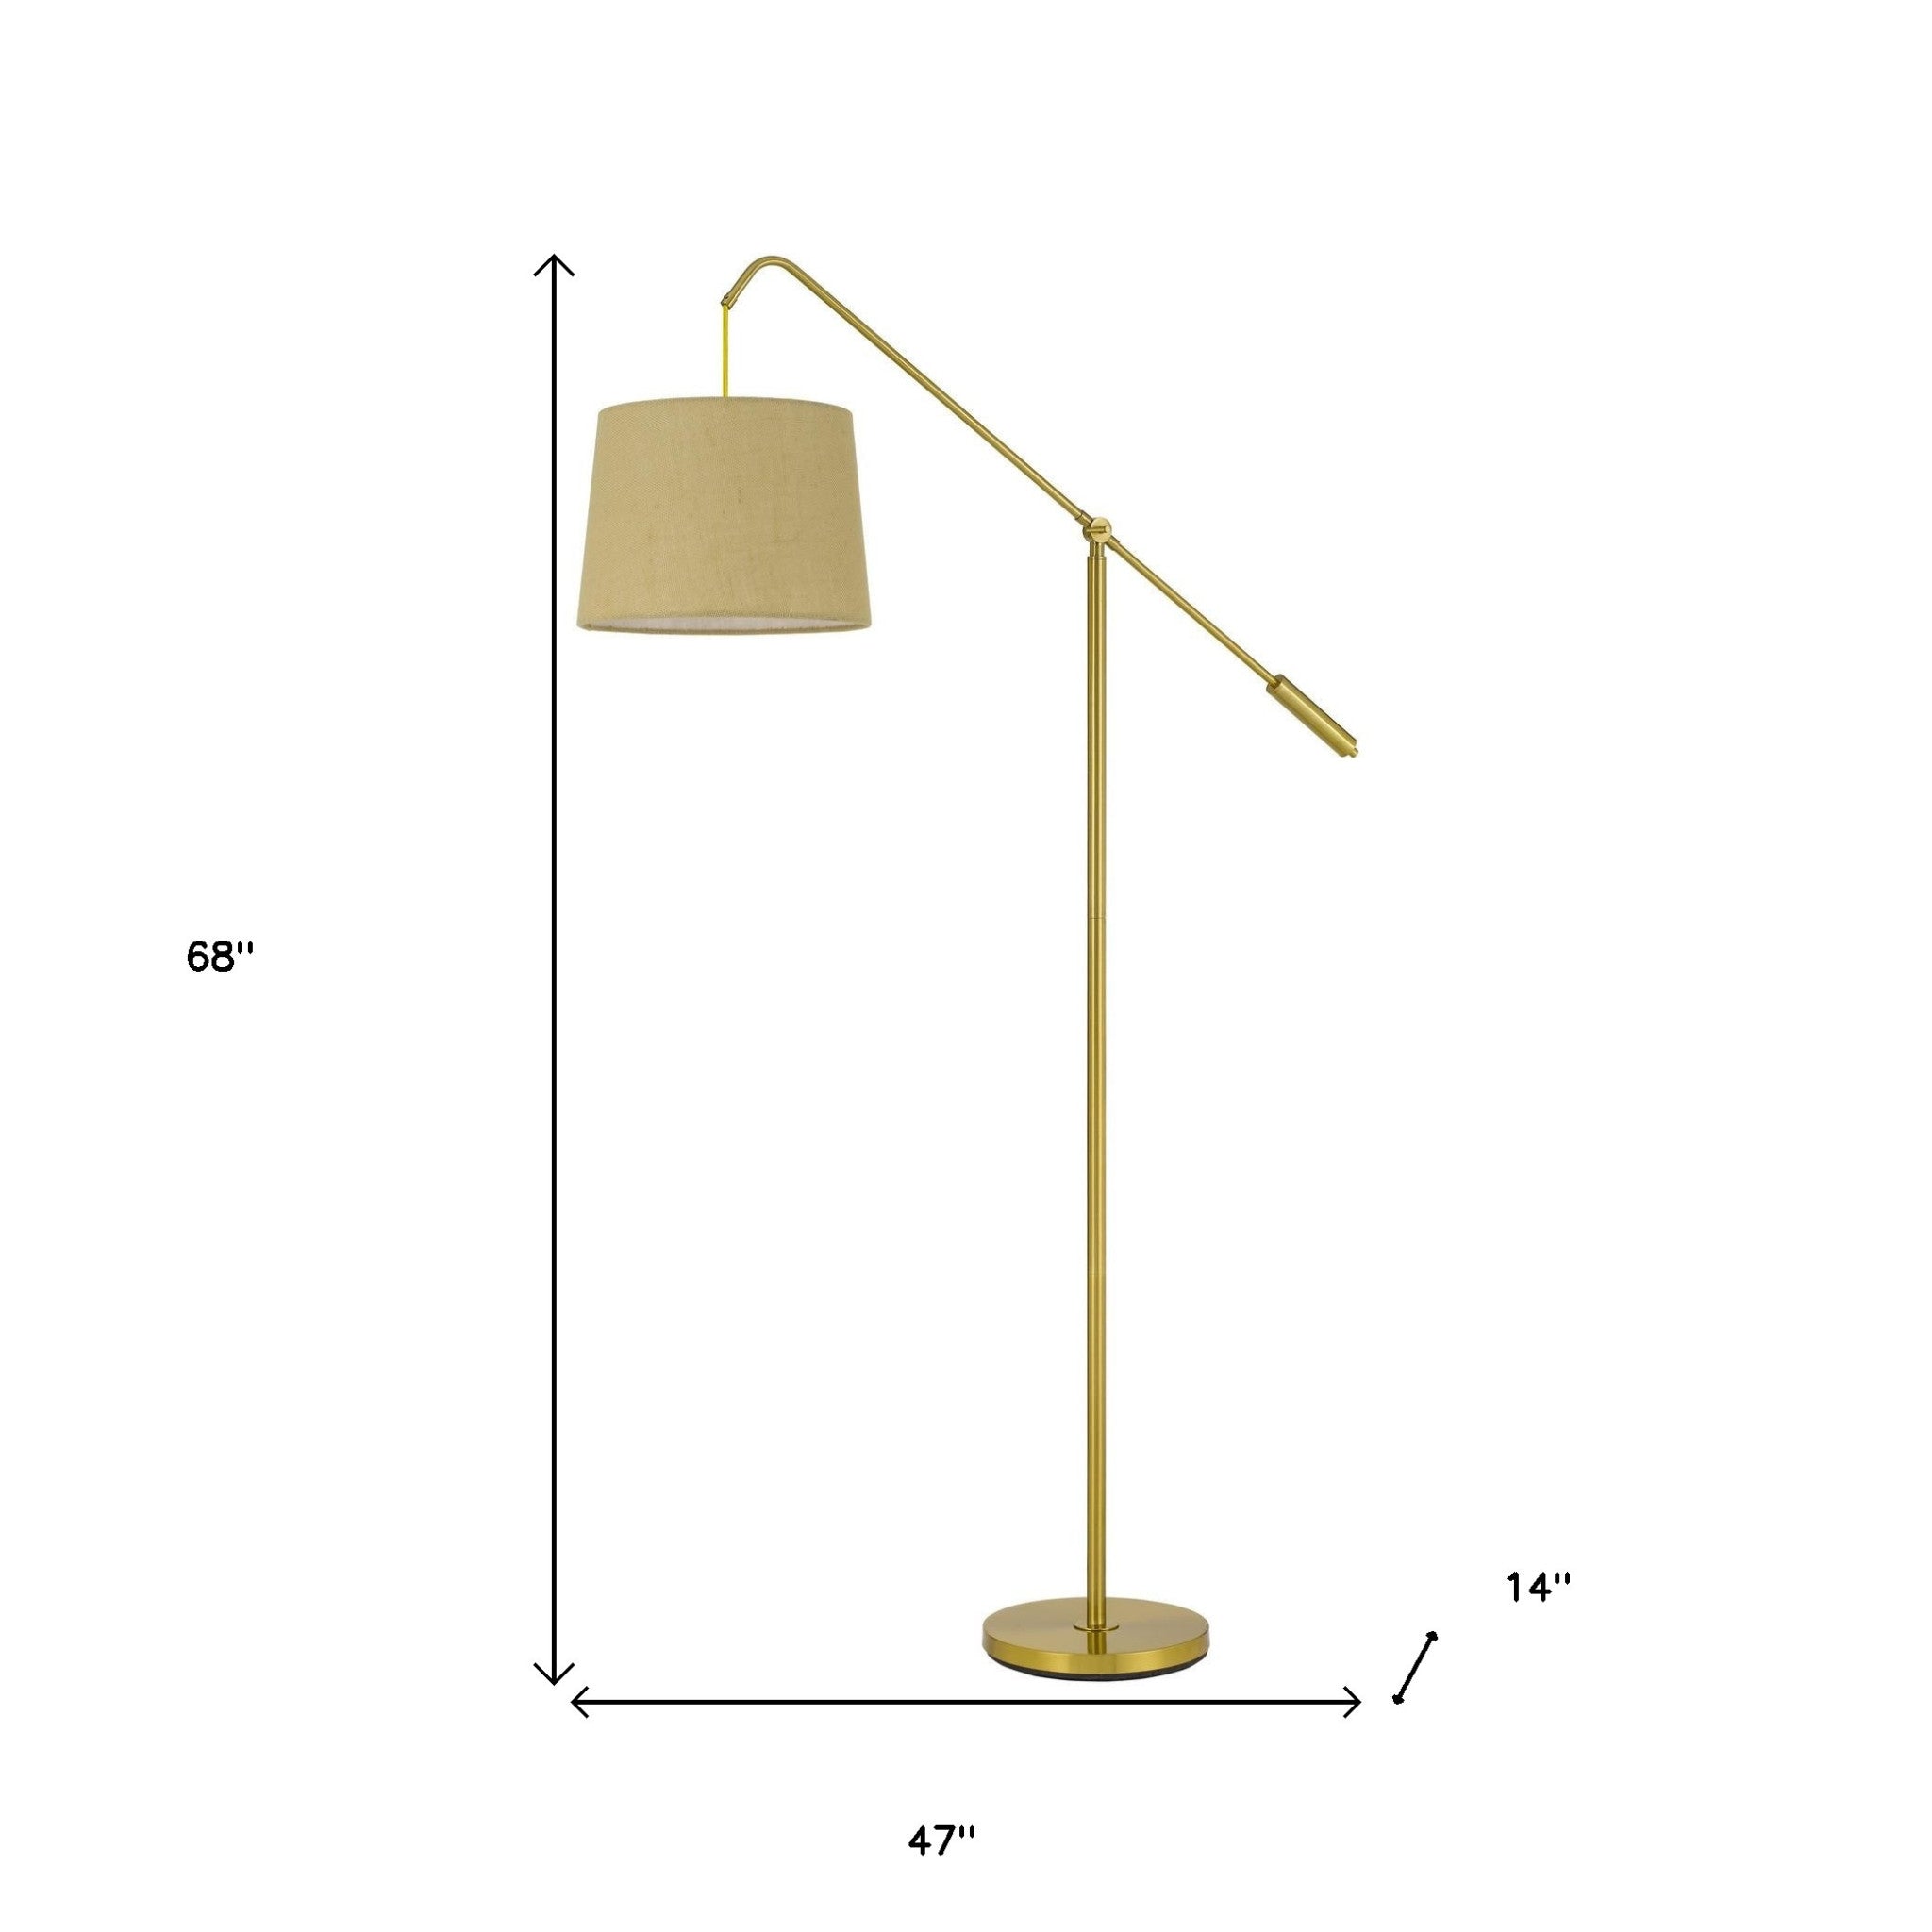 68" Brass Adjustable Traditional Shaped Floor Lamp With Antiqued Brass Drum Shade